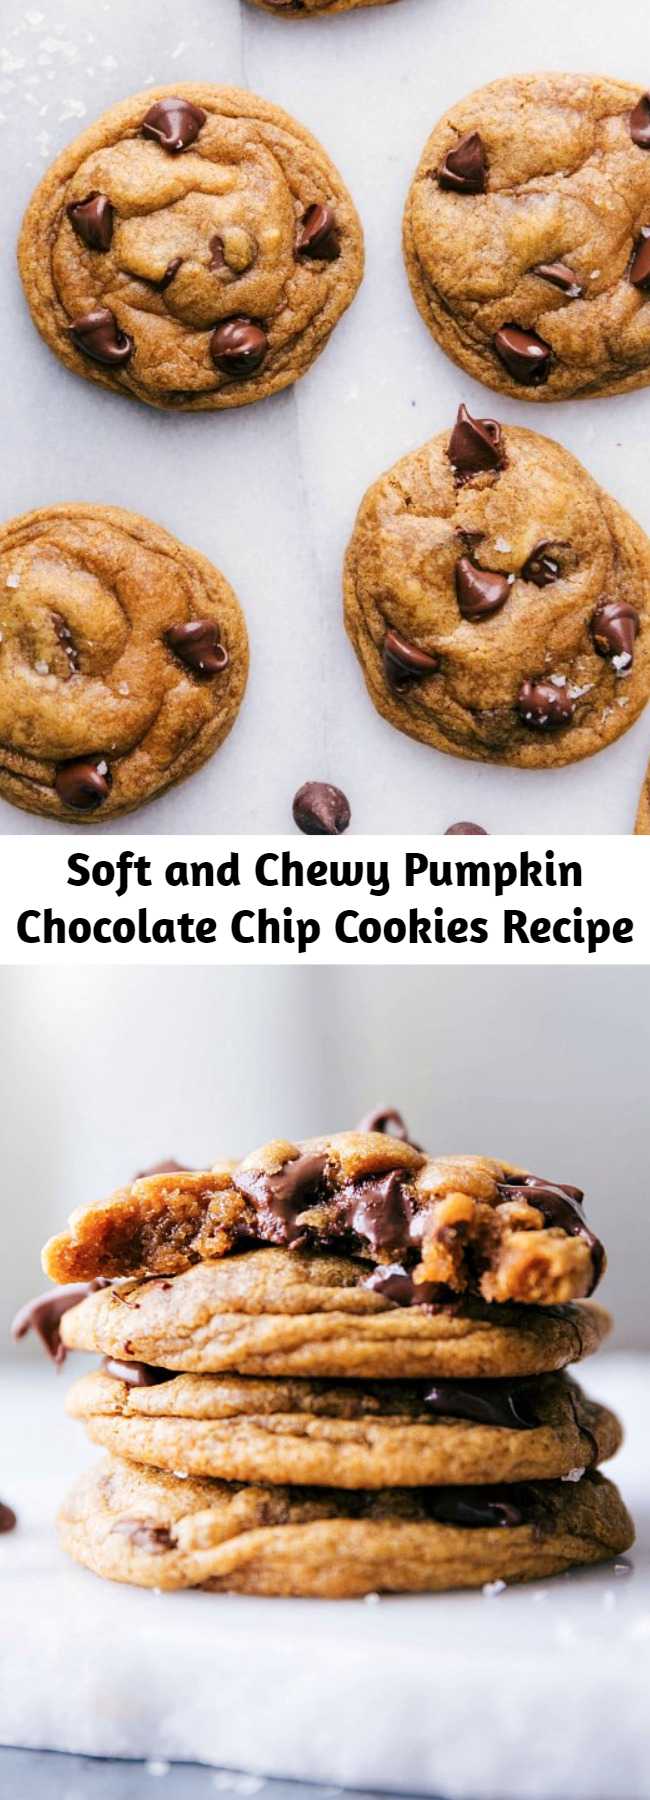 Soft and Chewy Pumpkin Chocolate Chip Cookies Recipe - The best-ever Pumpkin Chocolate Chip Cookies! These cookies are soft and chewy with crisp edges instead of typical cake-like pumpkin cookies.